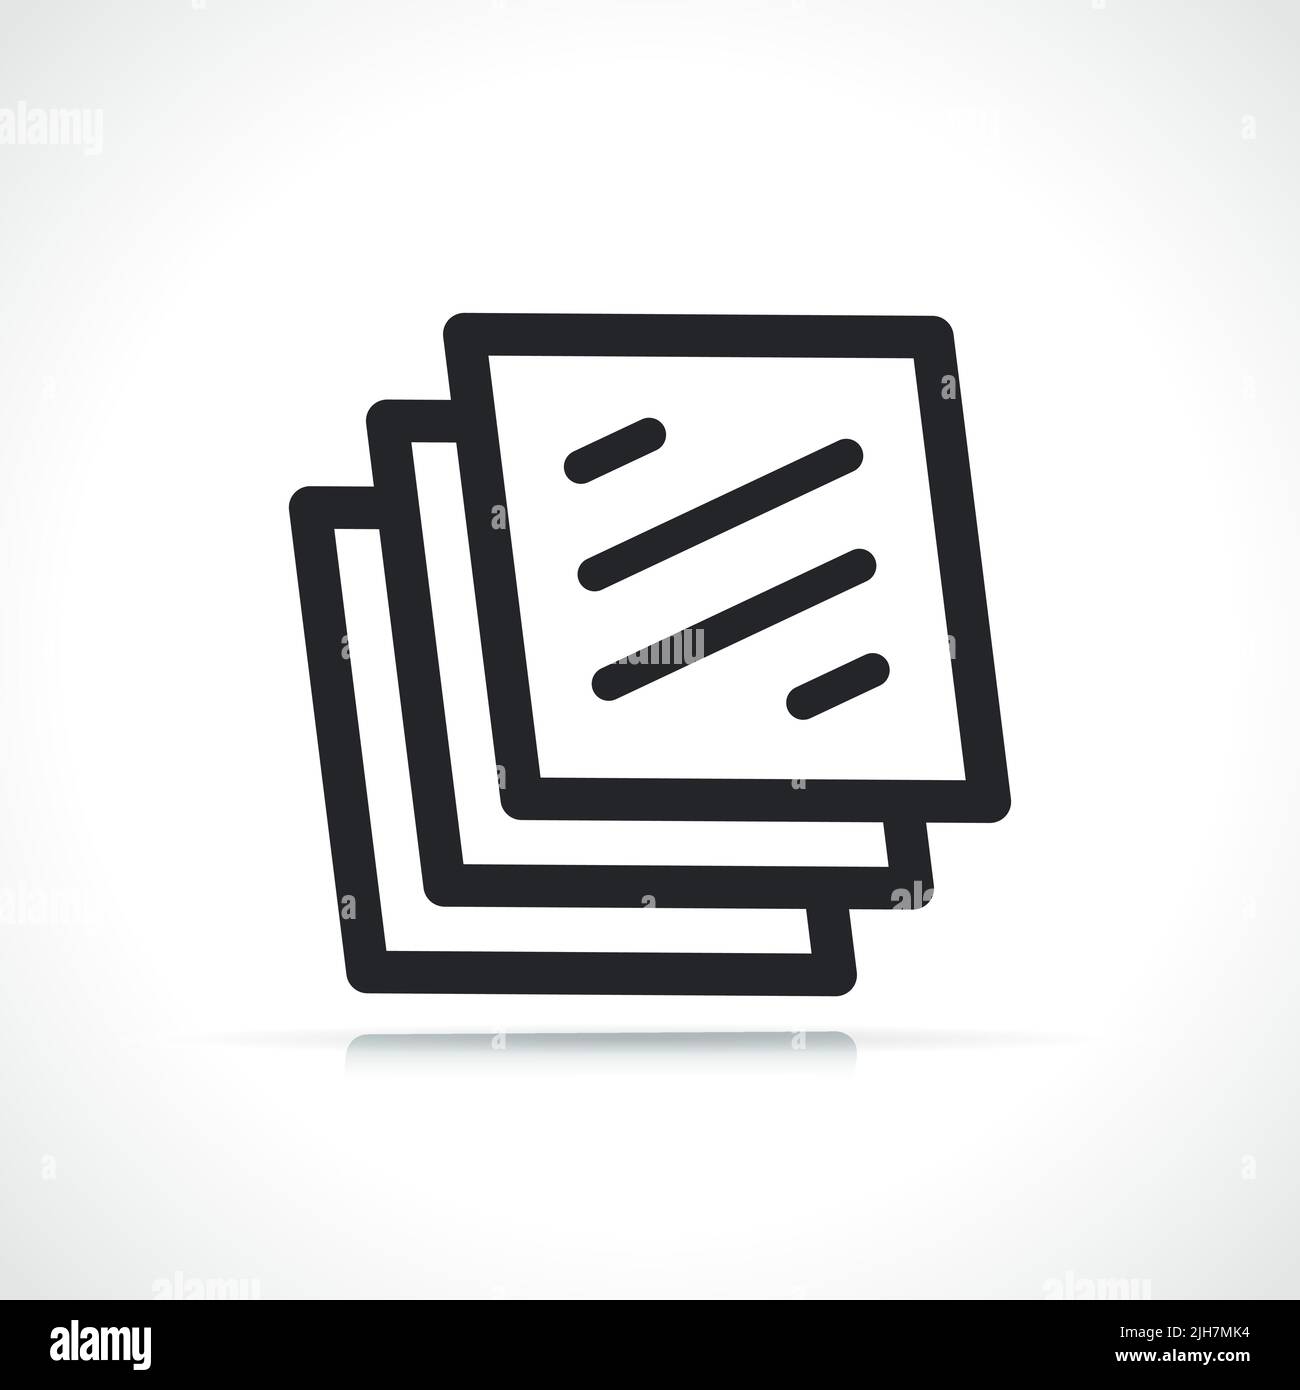 layered material thin line icon isolated illustration Stock Vector